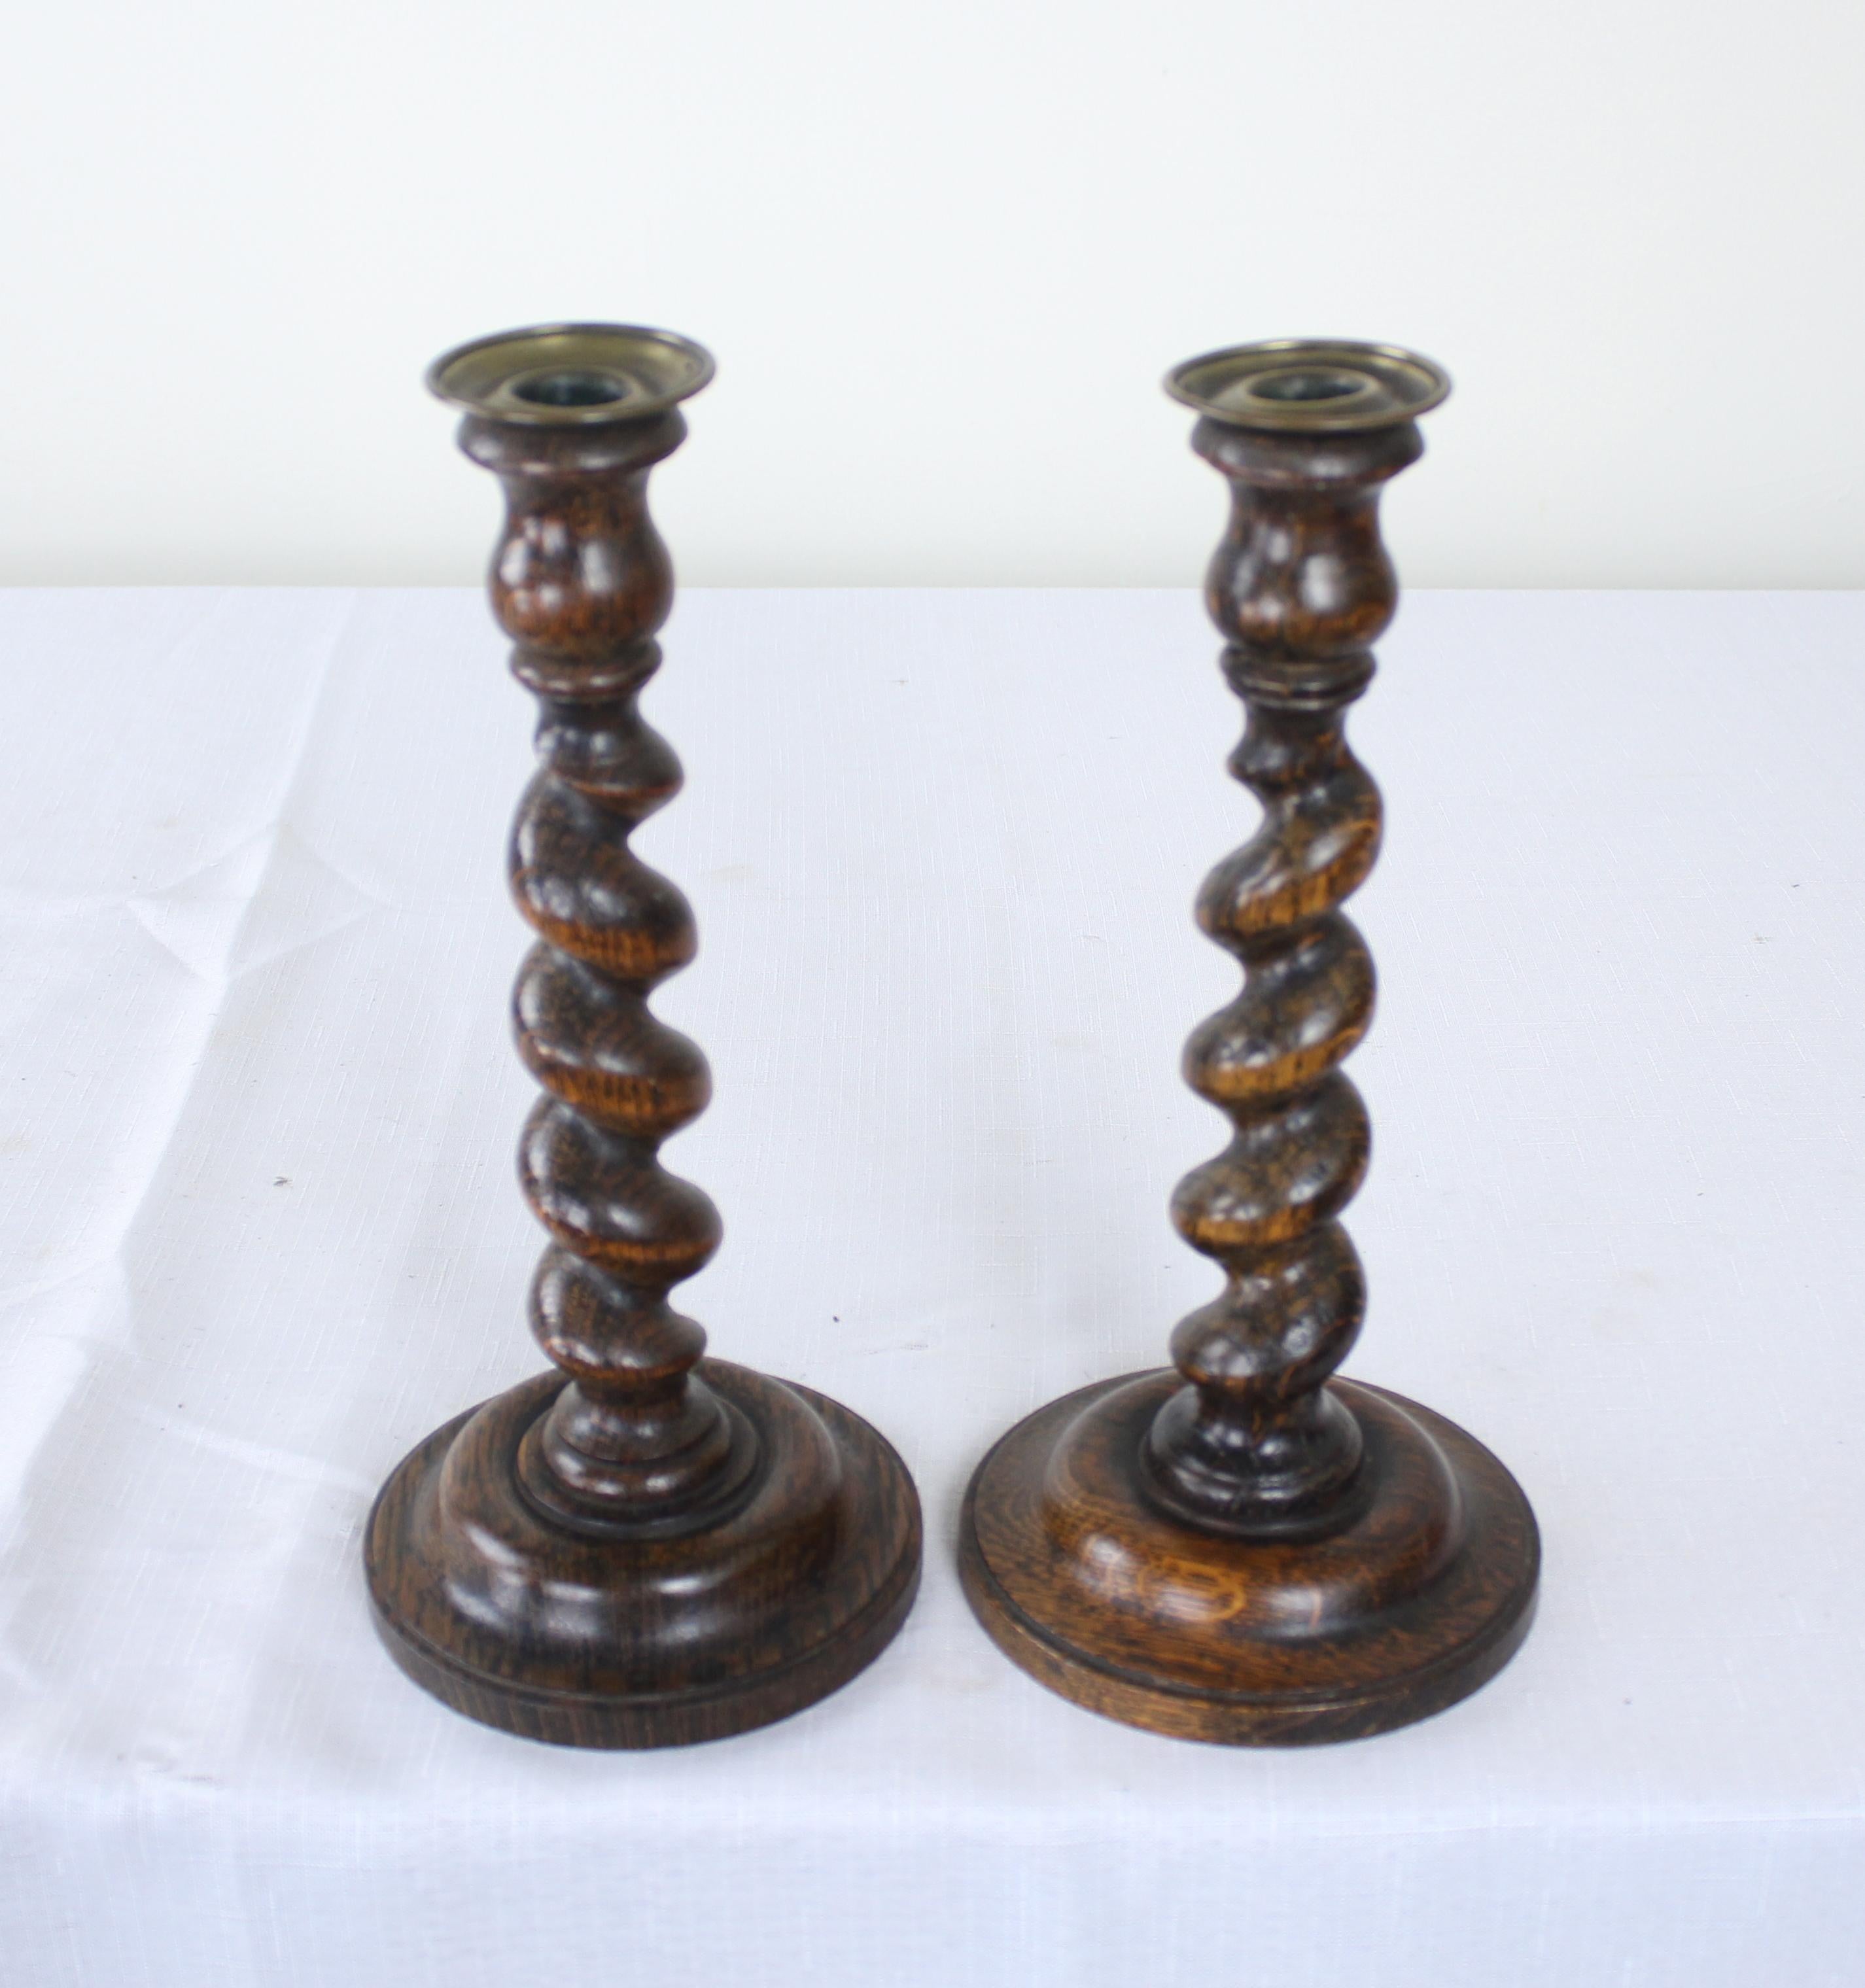 Two Pairs of Turned Oak Candlesticks 1